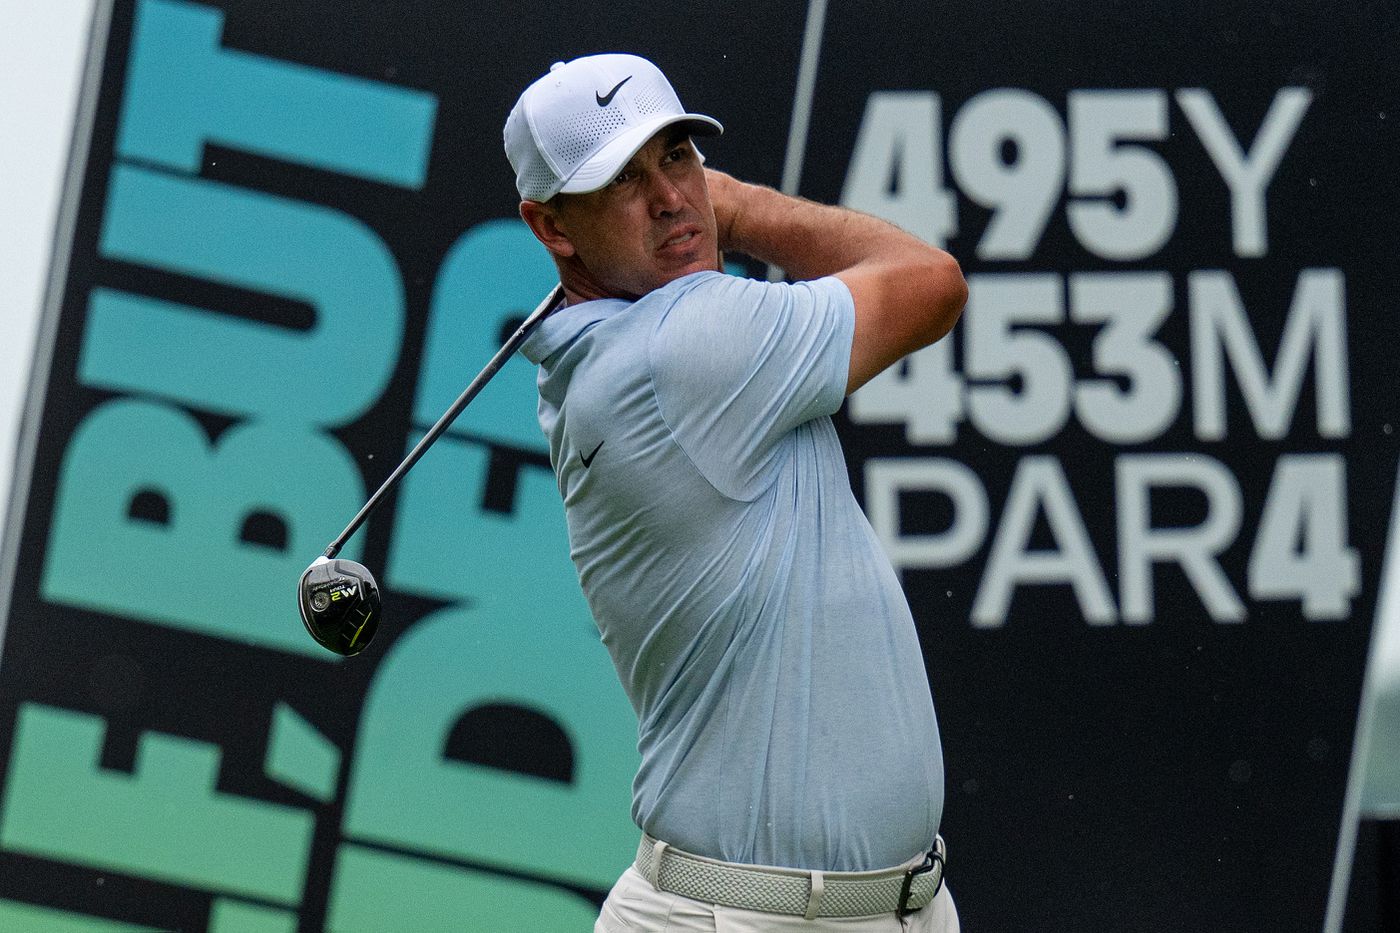 liv golf’s brooks koepka re-discovers swagger in final pga championship tune-up